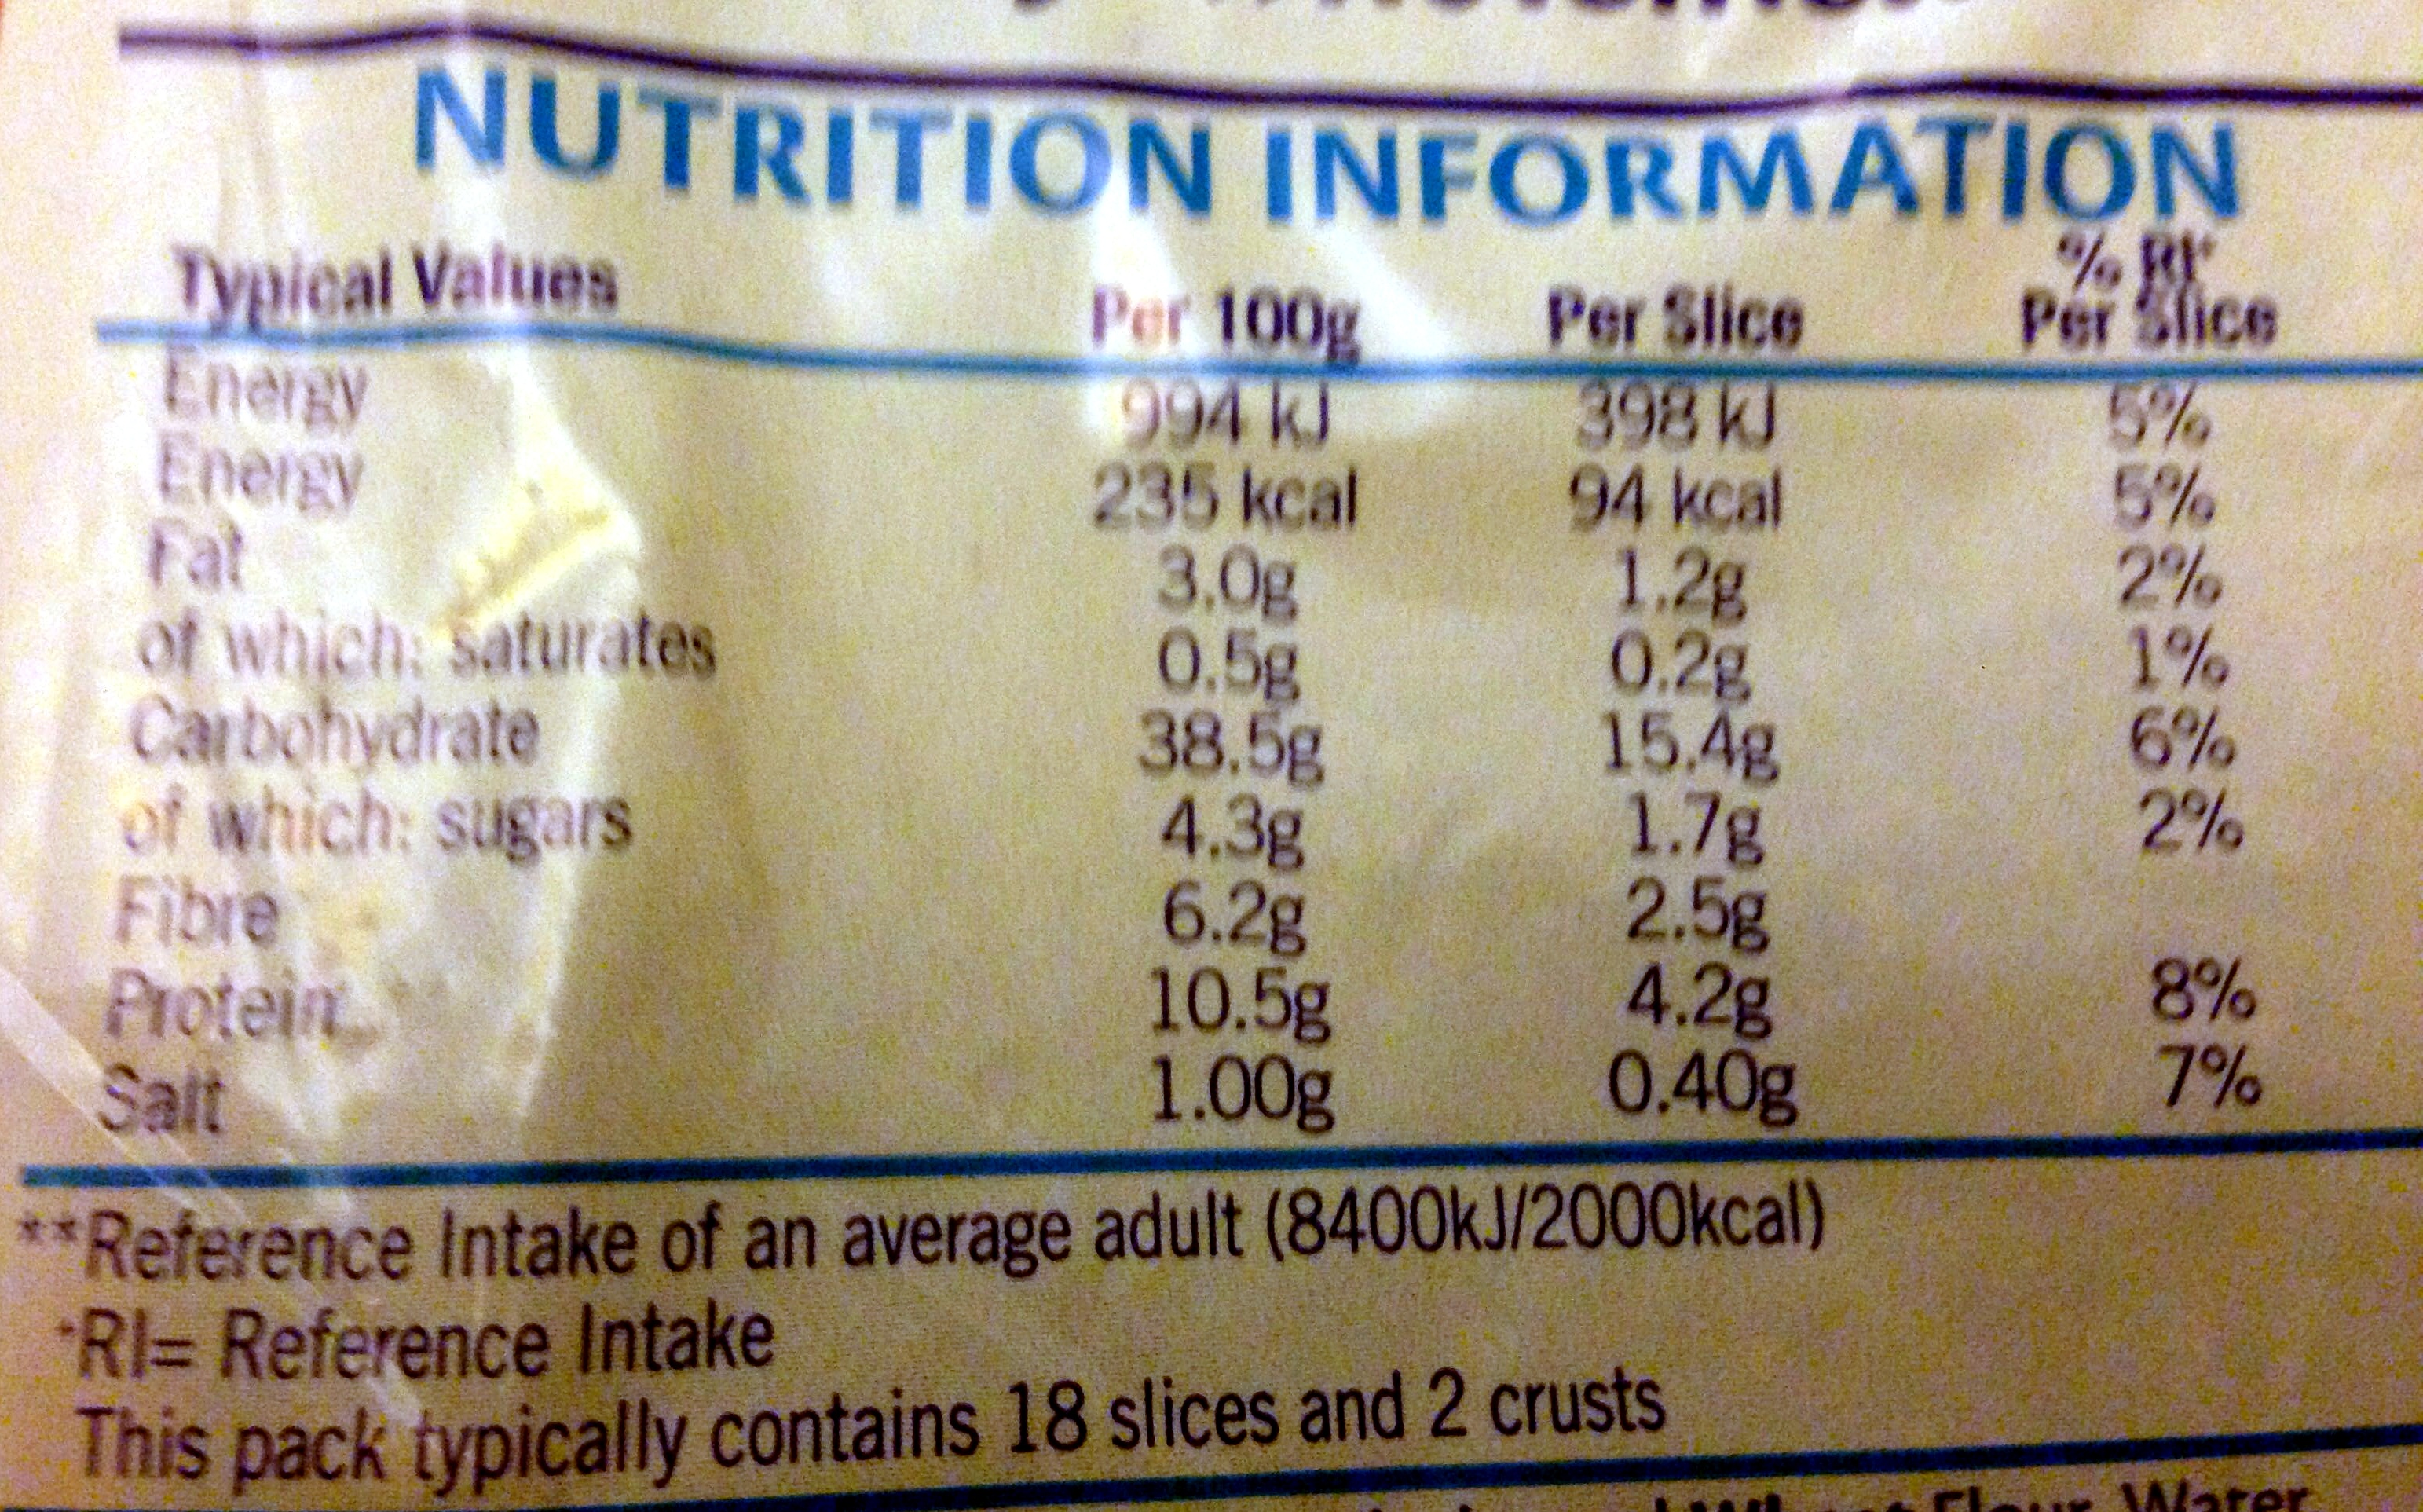 Tasty Wholemeal Bread - Kingsmill - 800G - Nutrition facts